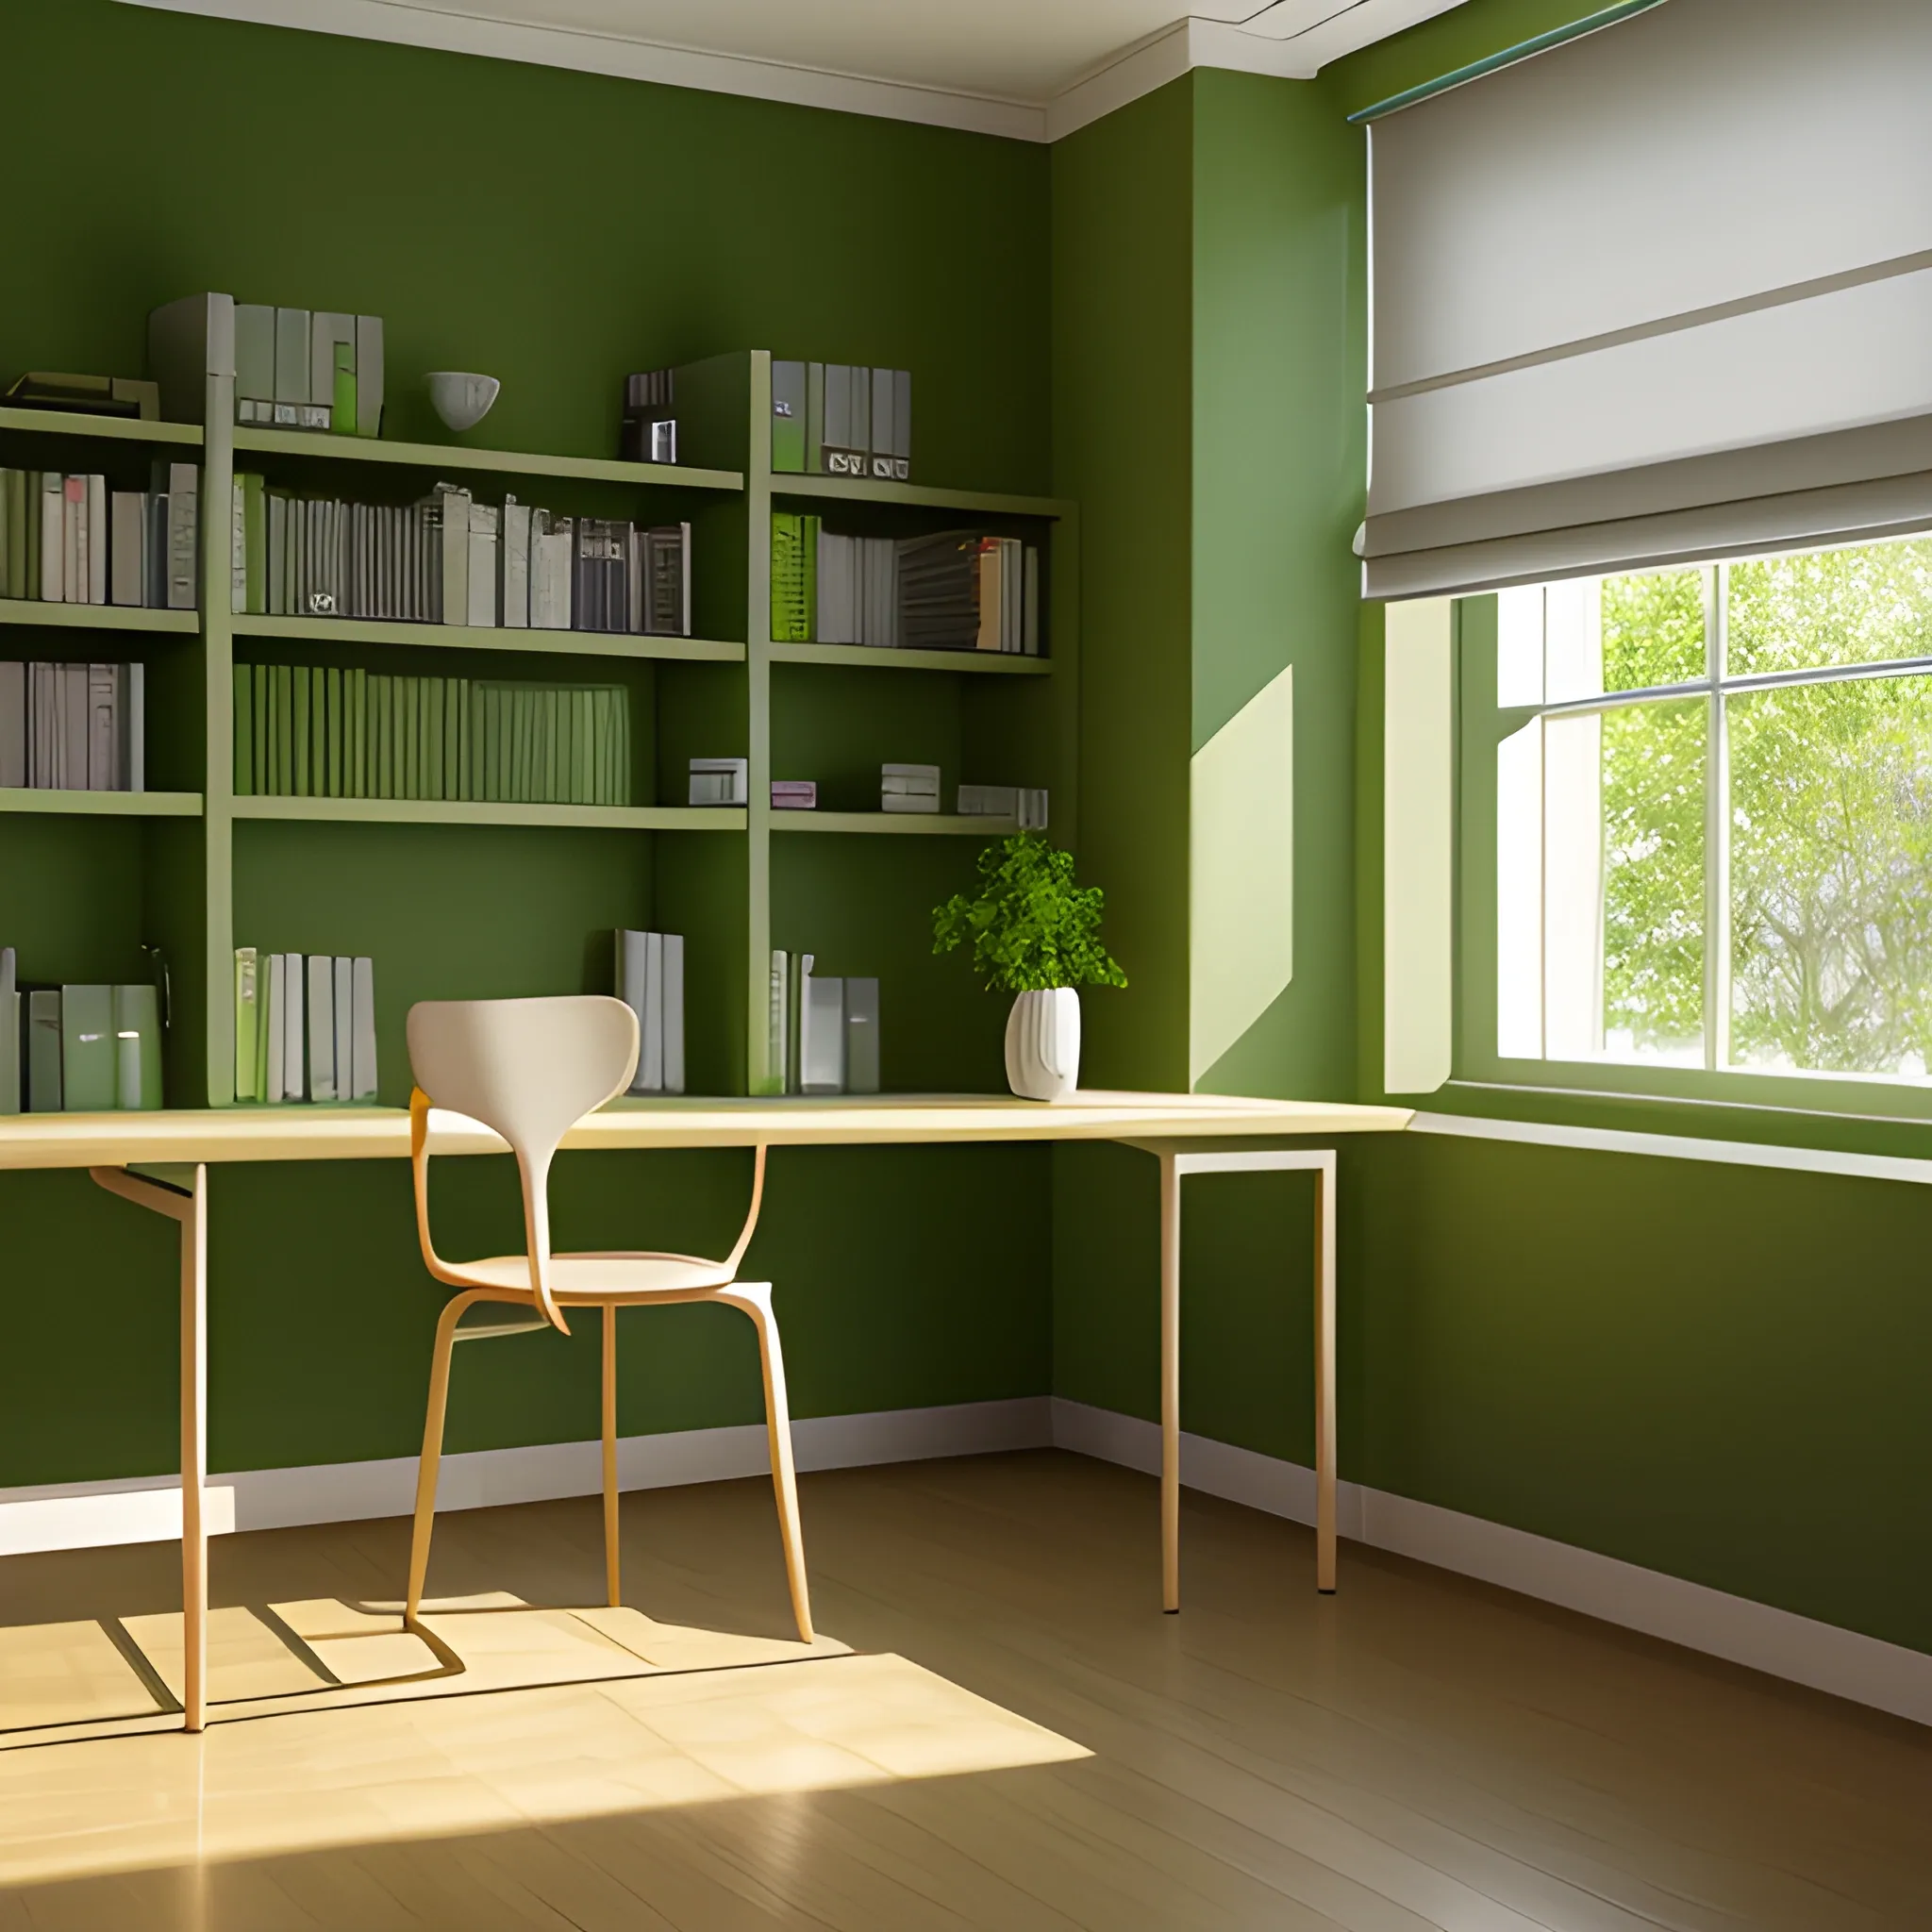 Study room,Modern,Natural lighting,Green Color Palette,extremely detailed,8K,Hyperrealistic,